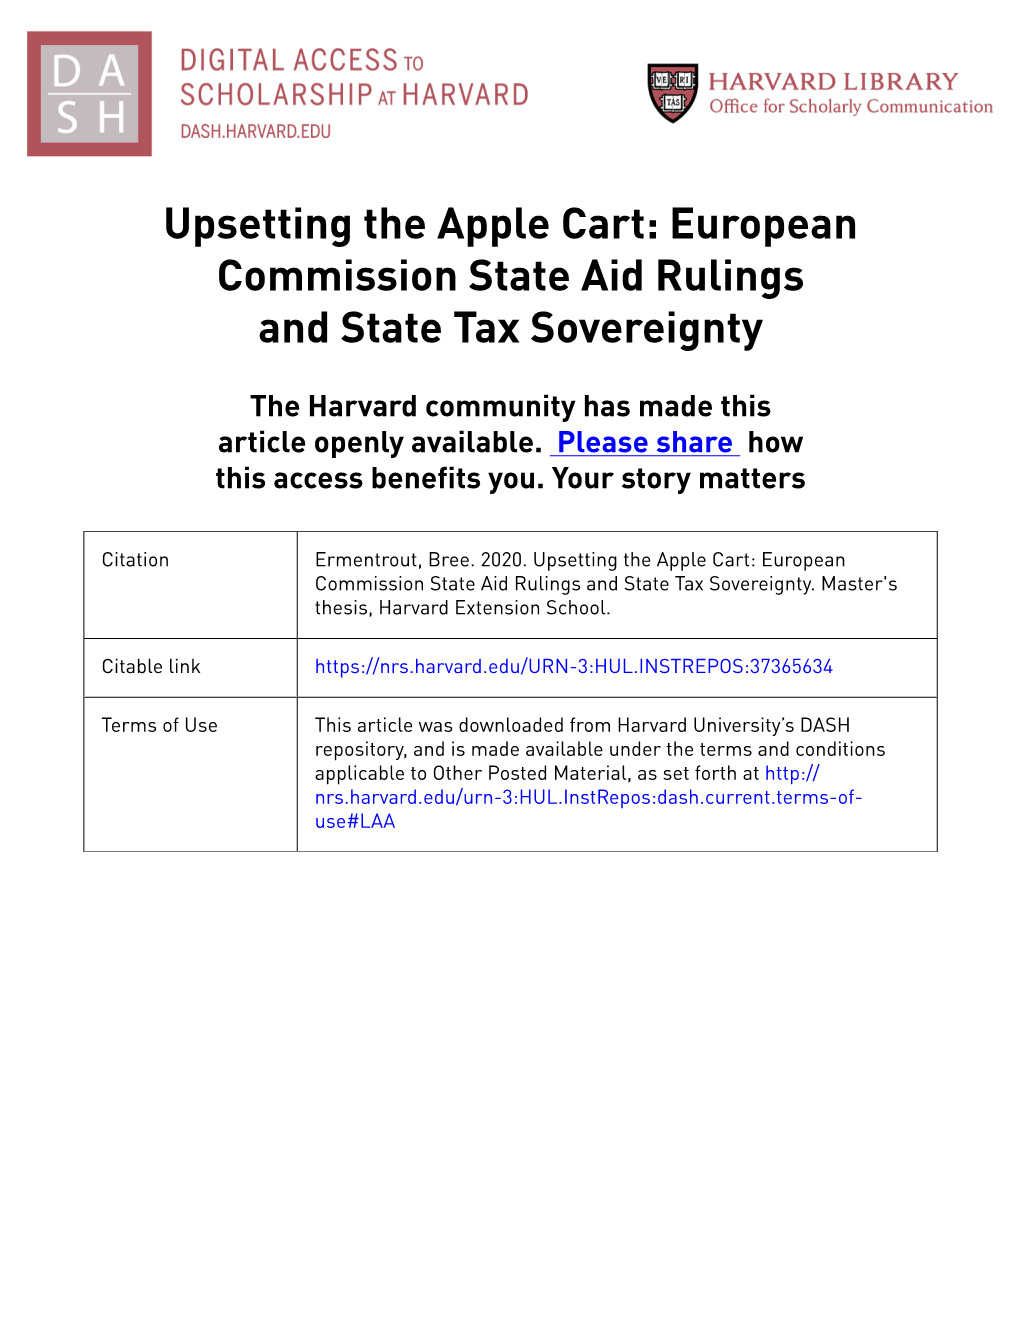 European Commission State Aid Rulings and State Tax Sovereignty